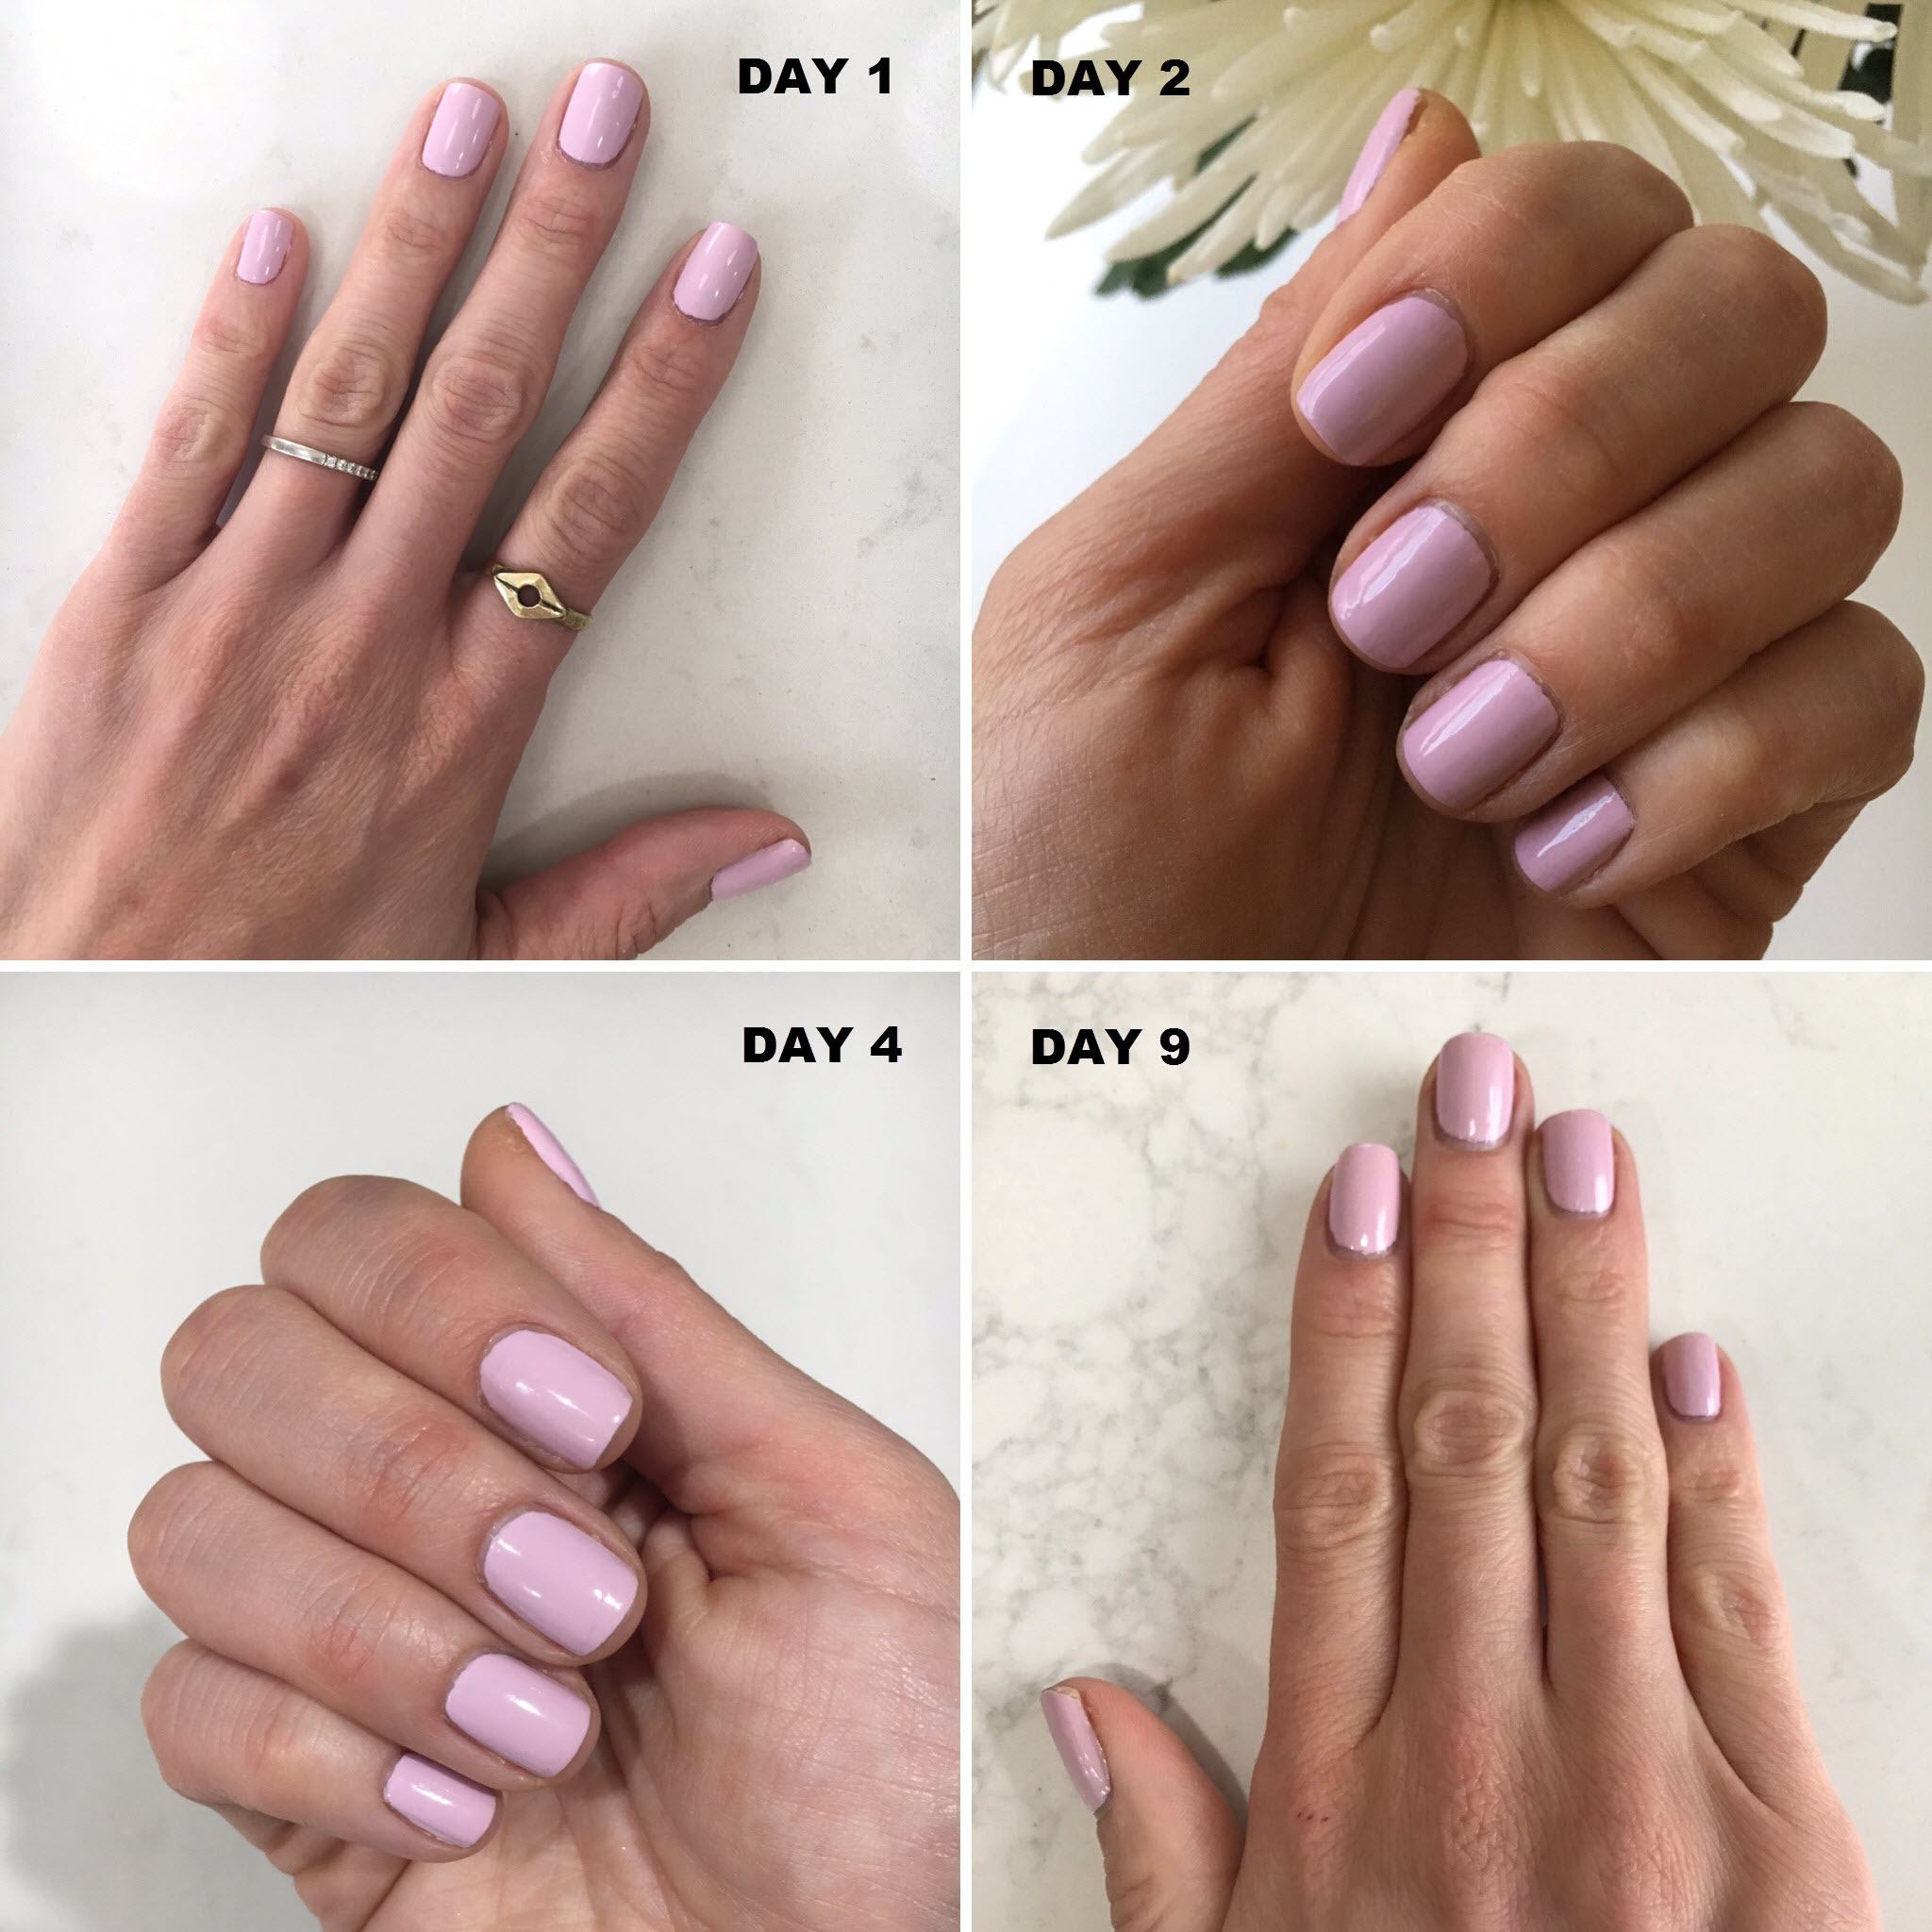 how to get a salon quality manicure at home | my tips for an at home manicure | cnd vinylux nail polish | shellac manicure at home on allweareblog.com